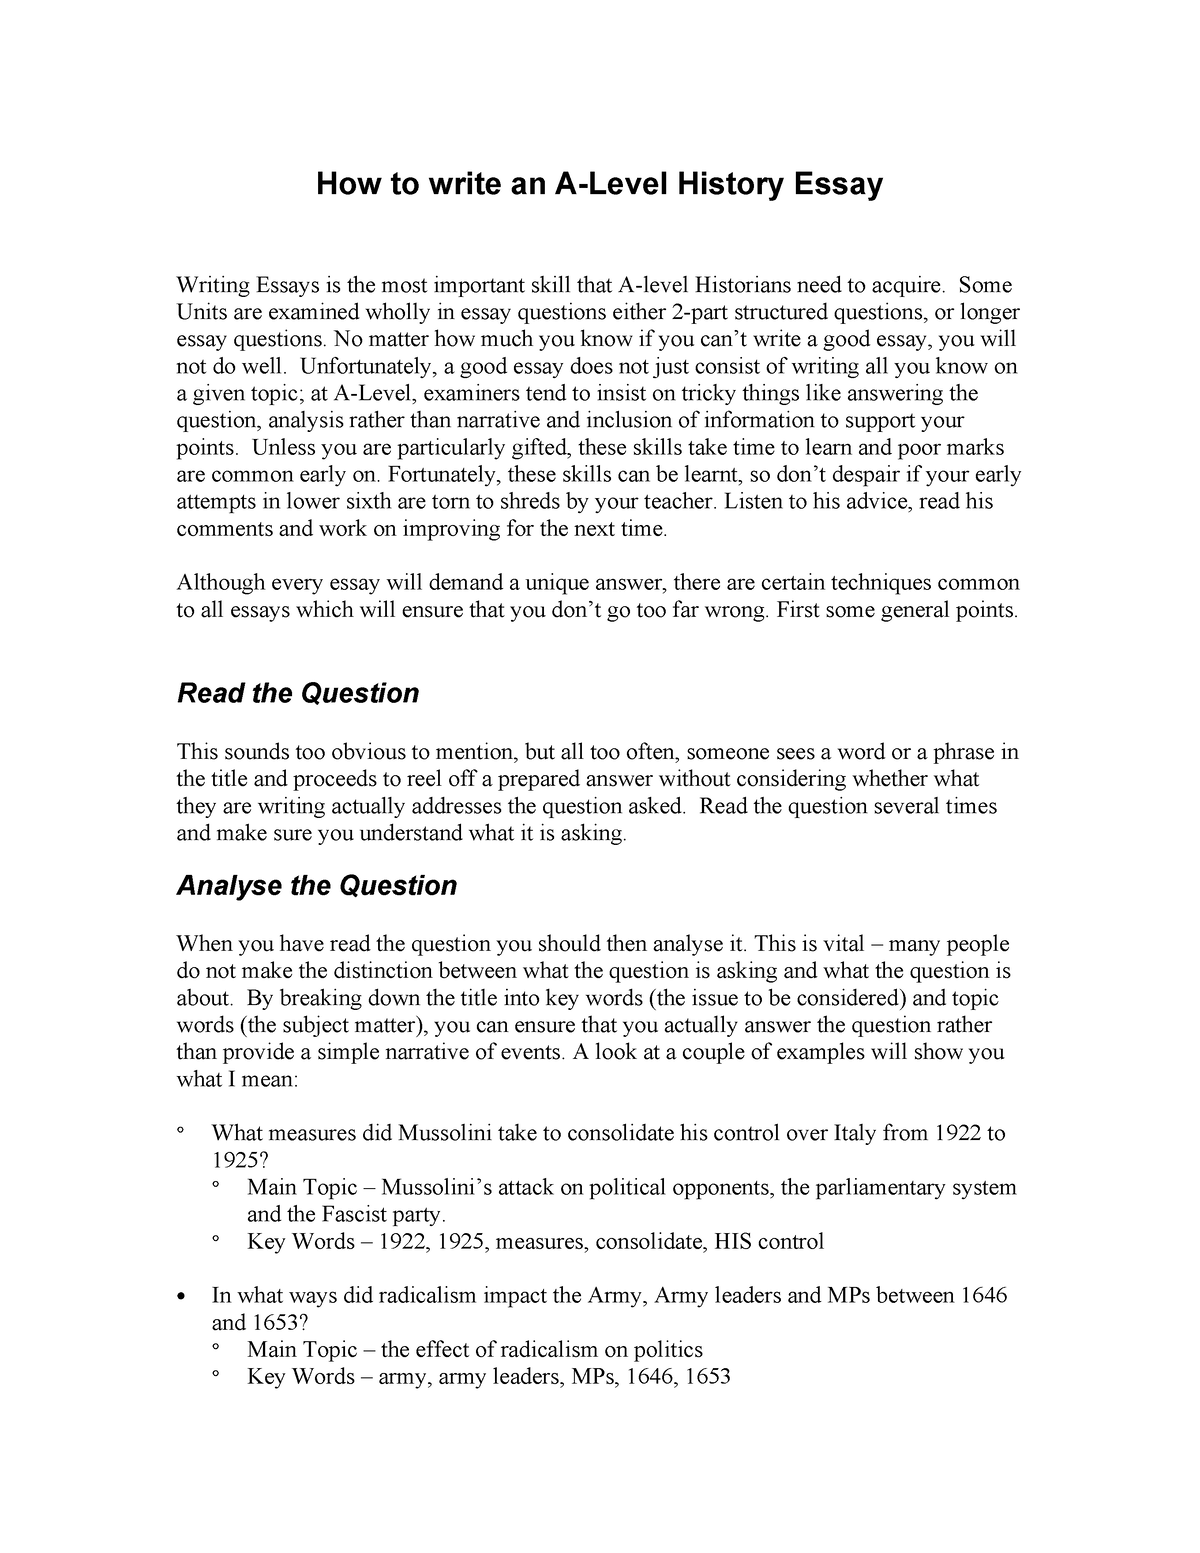 how long should an a level history essay be